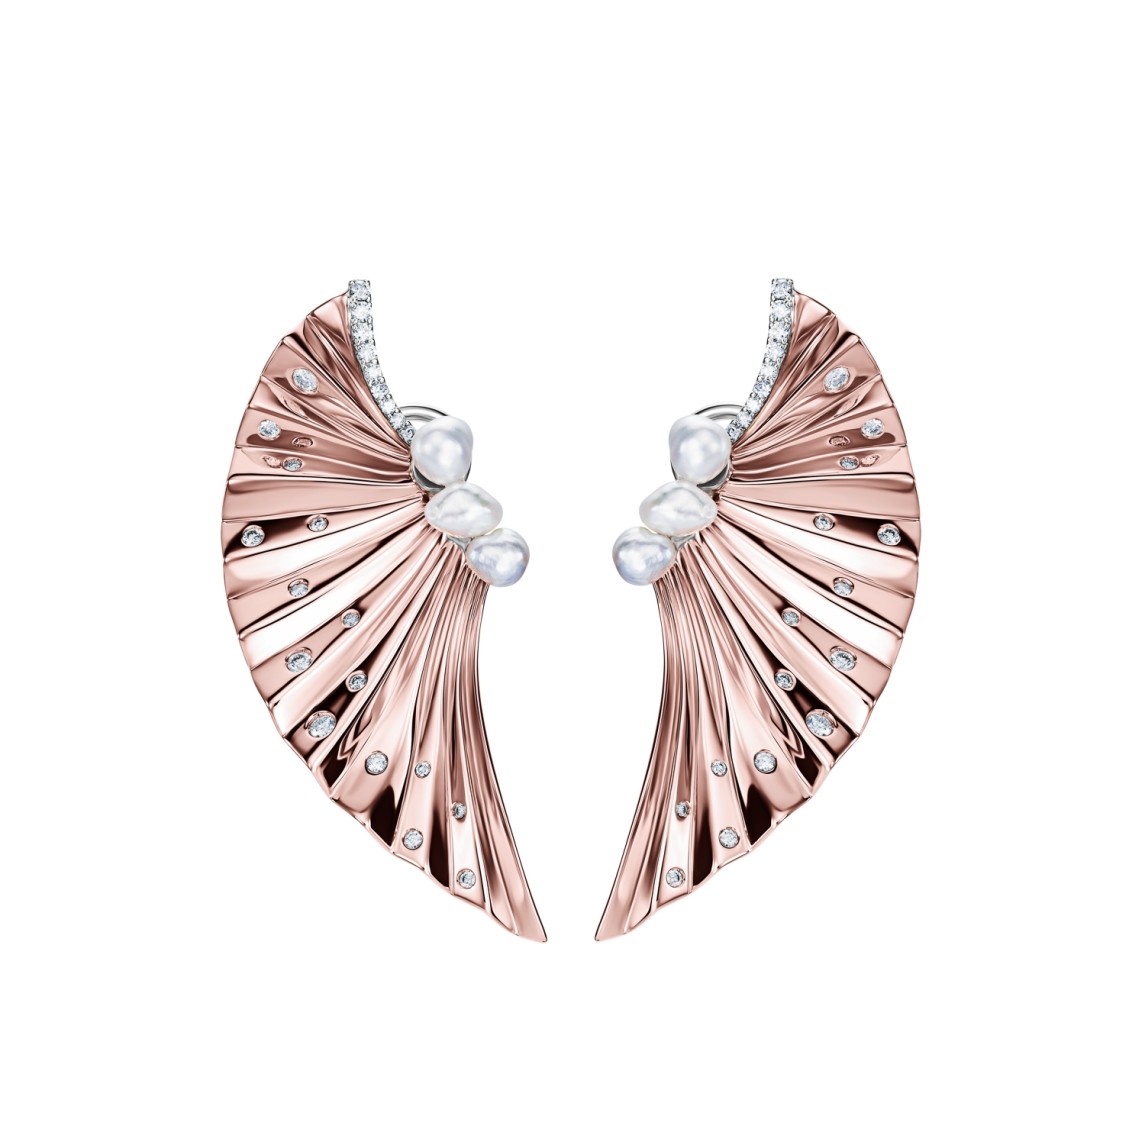 Rose Gold Earrings With Diamonds And Pearls